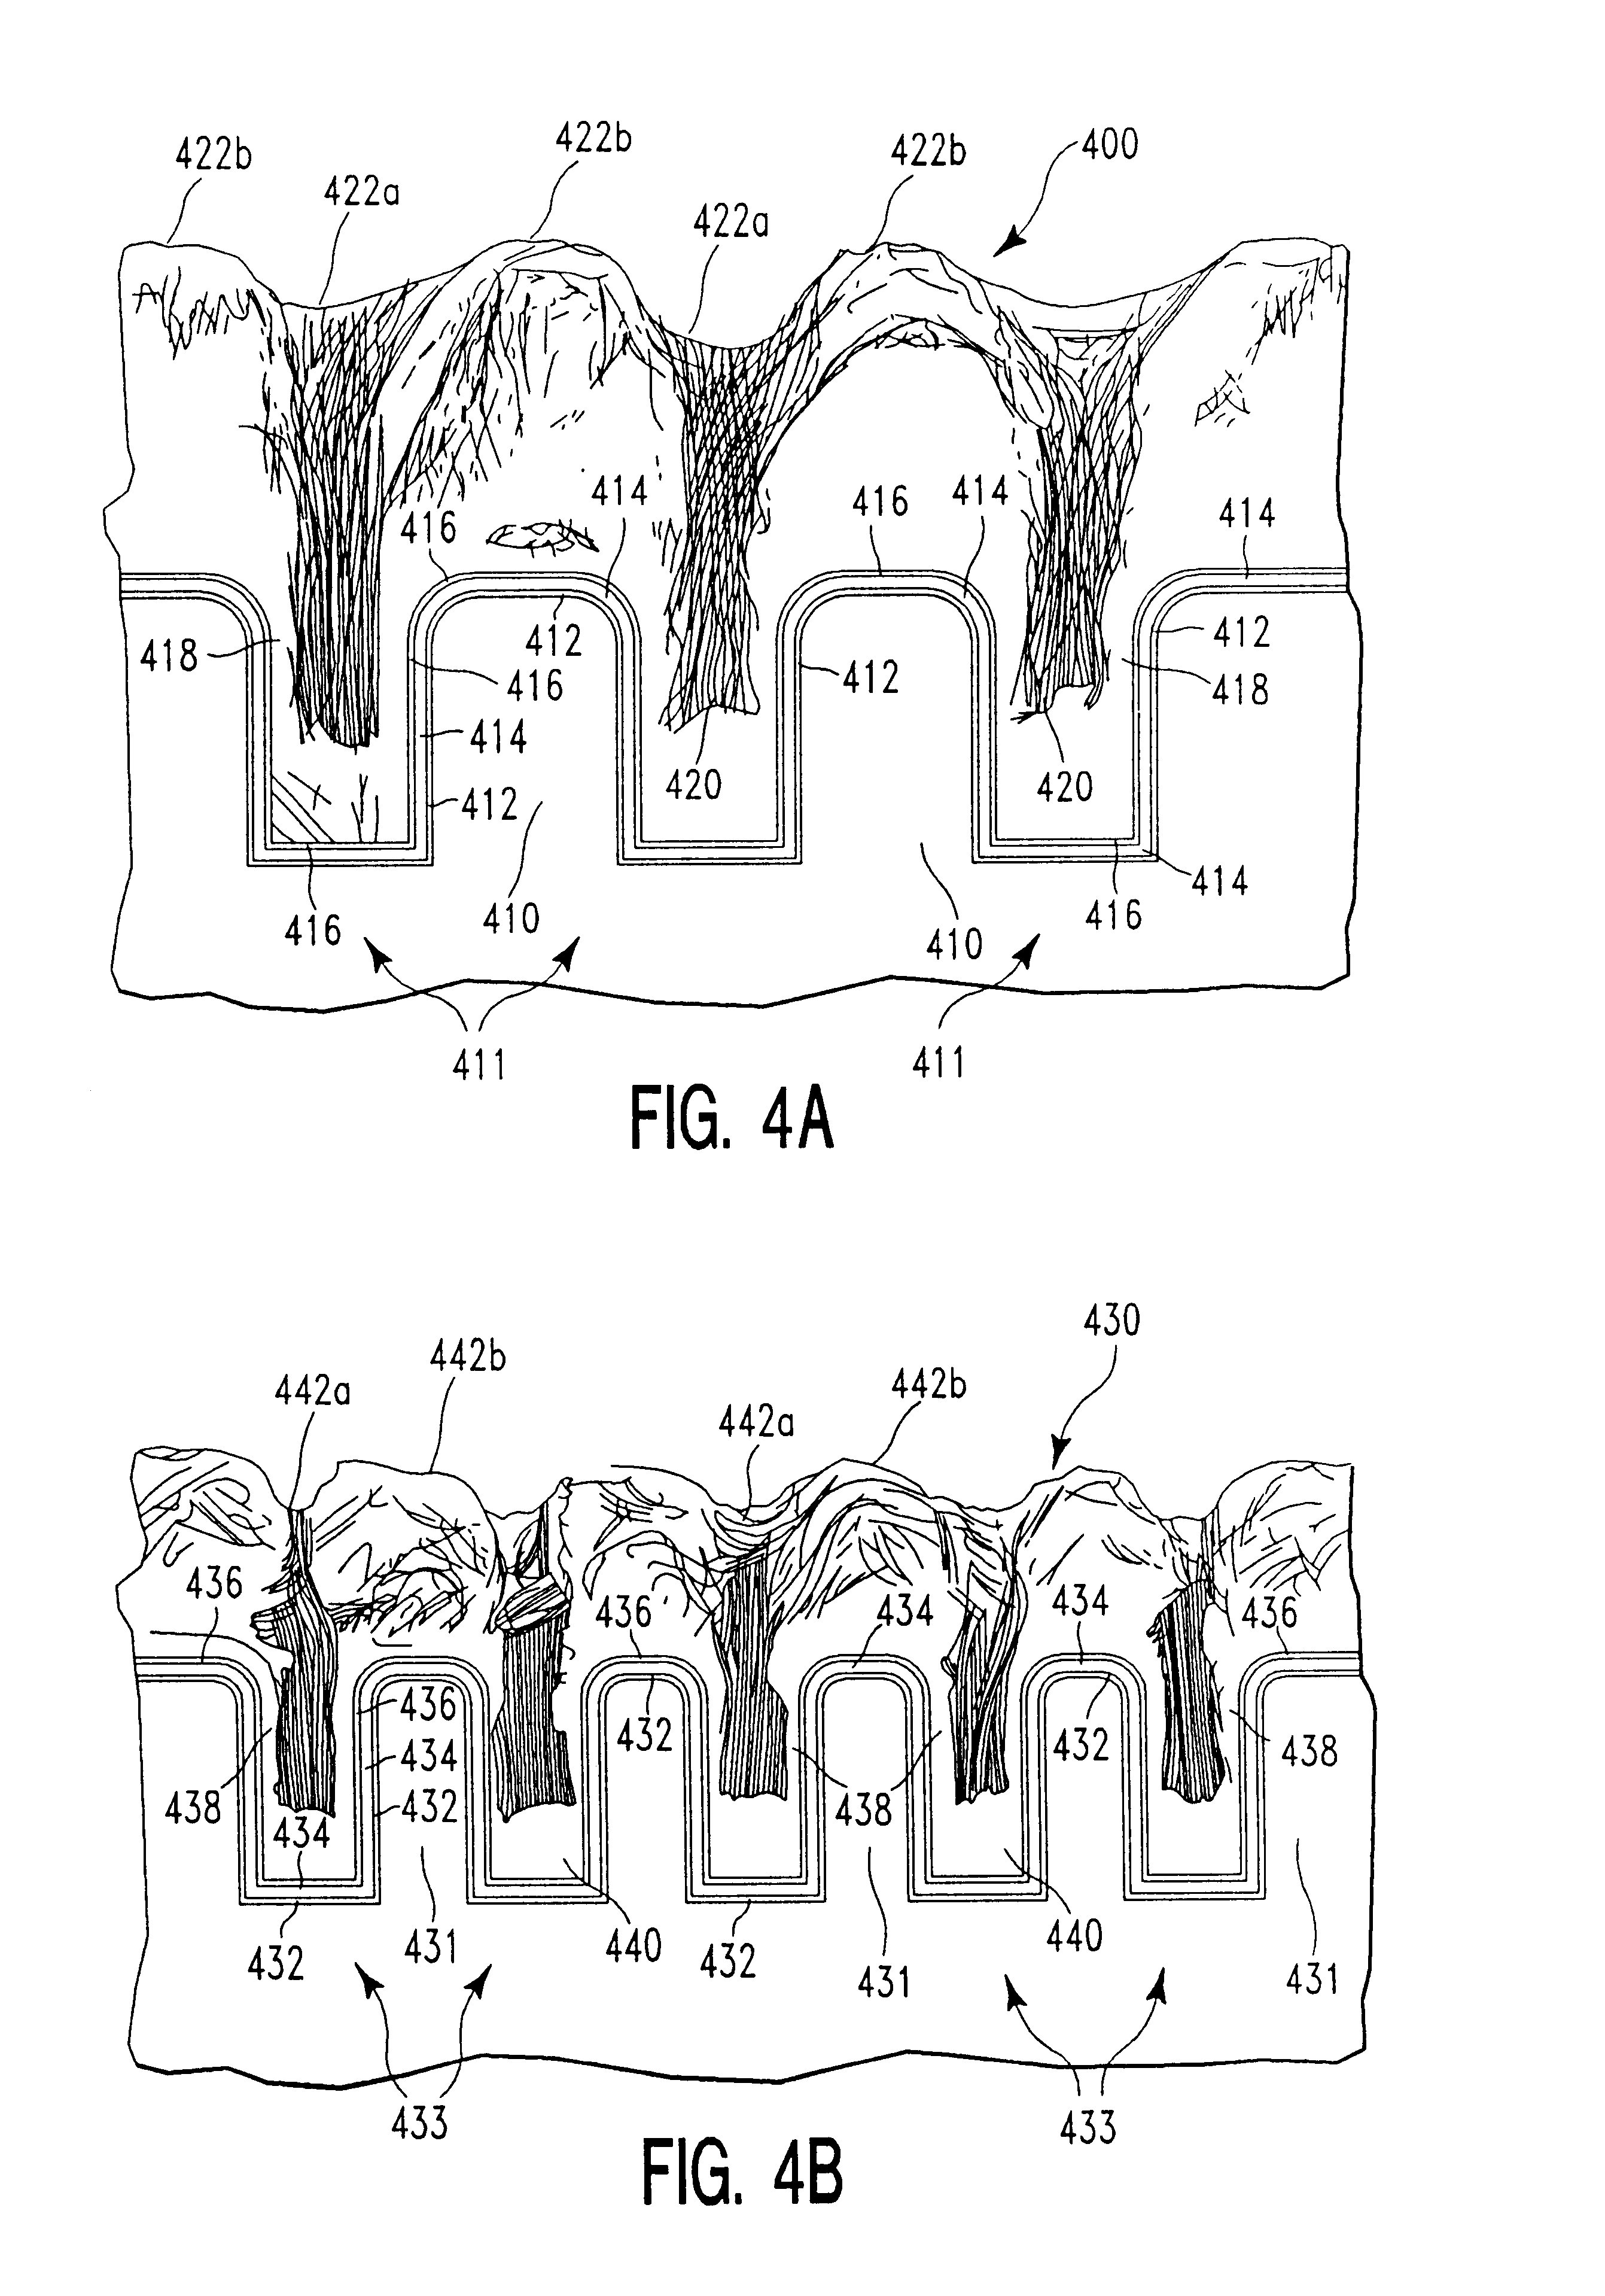 Method of sputtering copper to fill trenches and vias